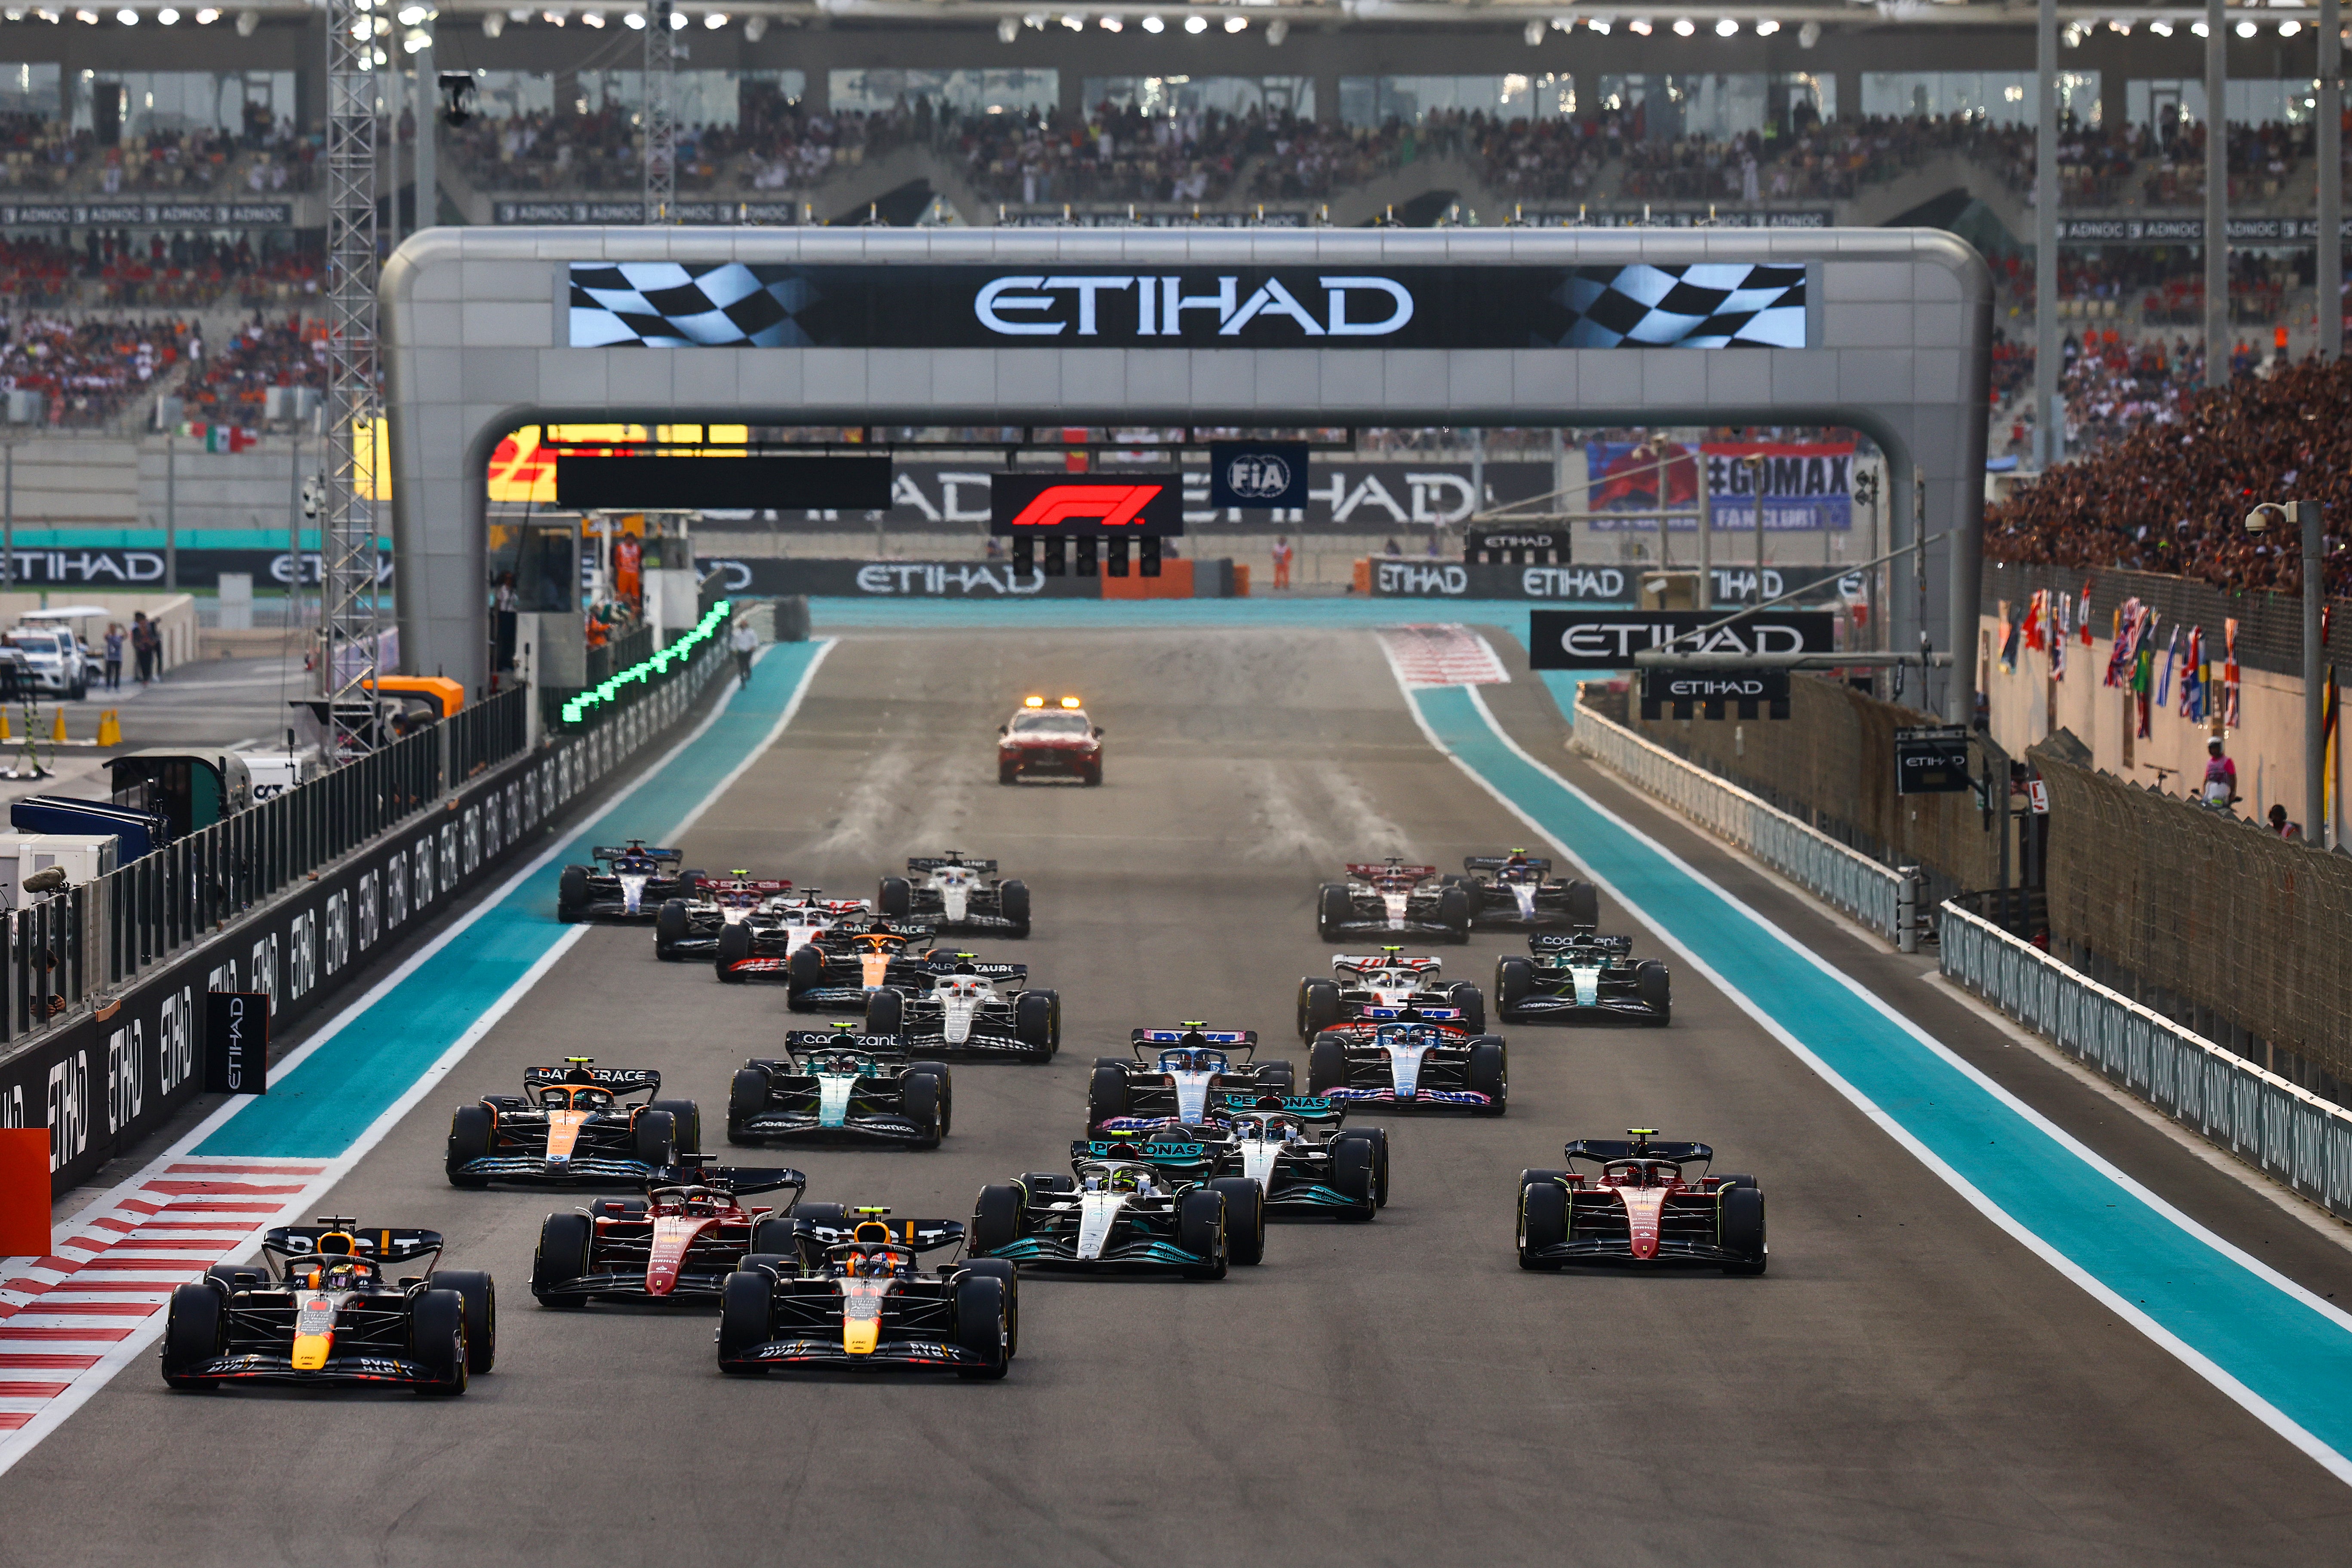 The Abu Dhabi Grand Prix is not at risk of being cancelled, F1 confirmed